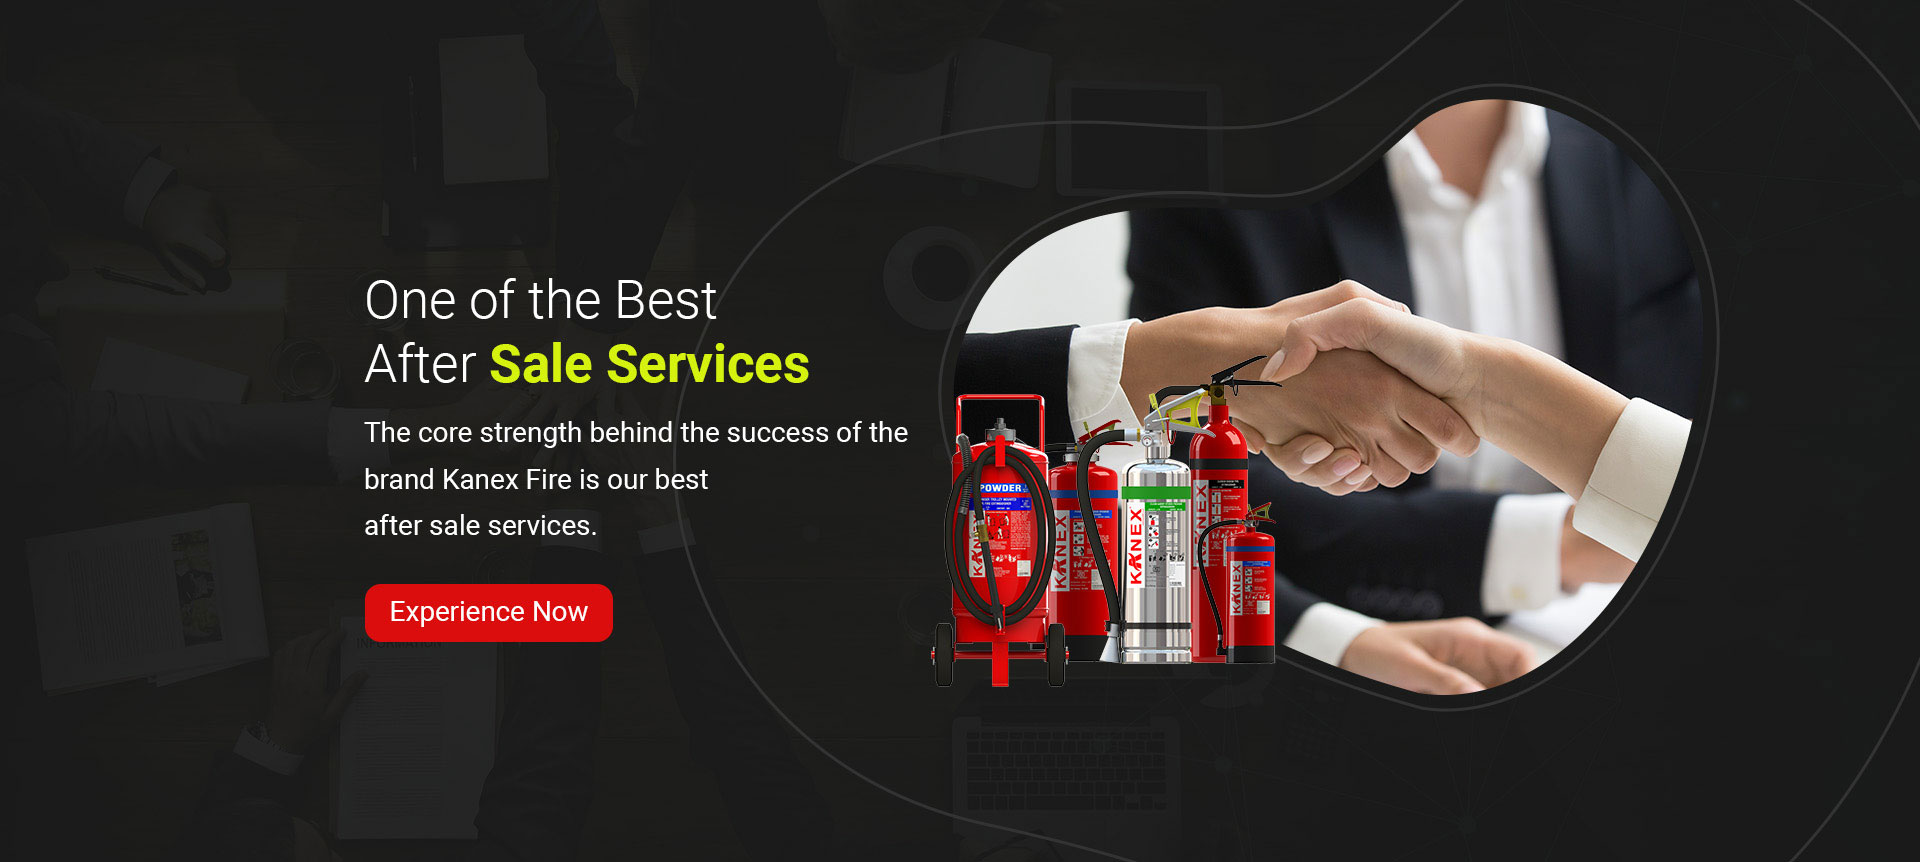 Kanex Fire - Fire Fighting Equipment Manufacturer and Supplier